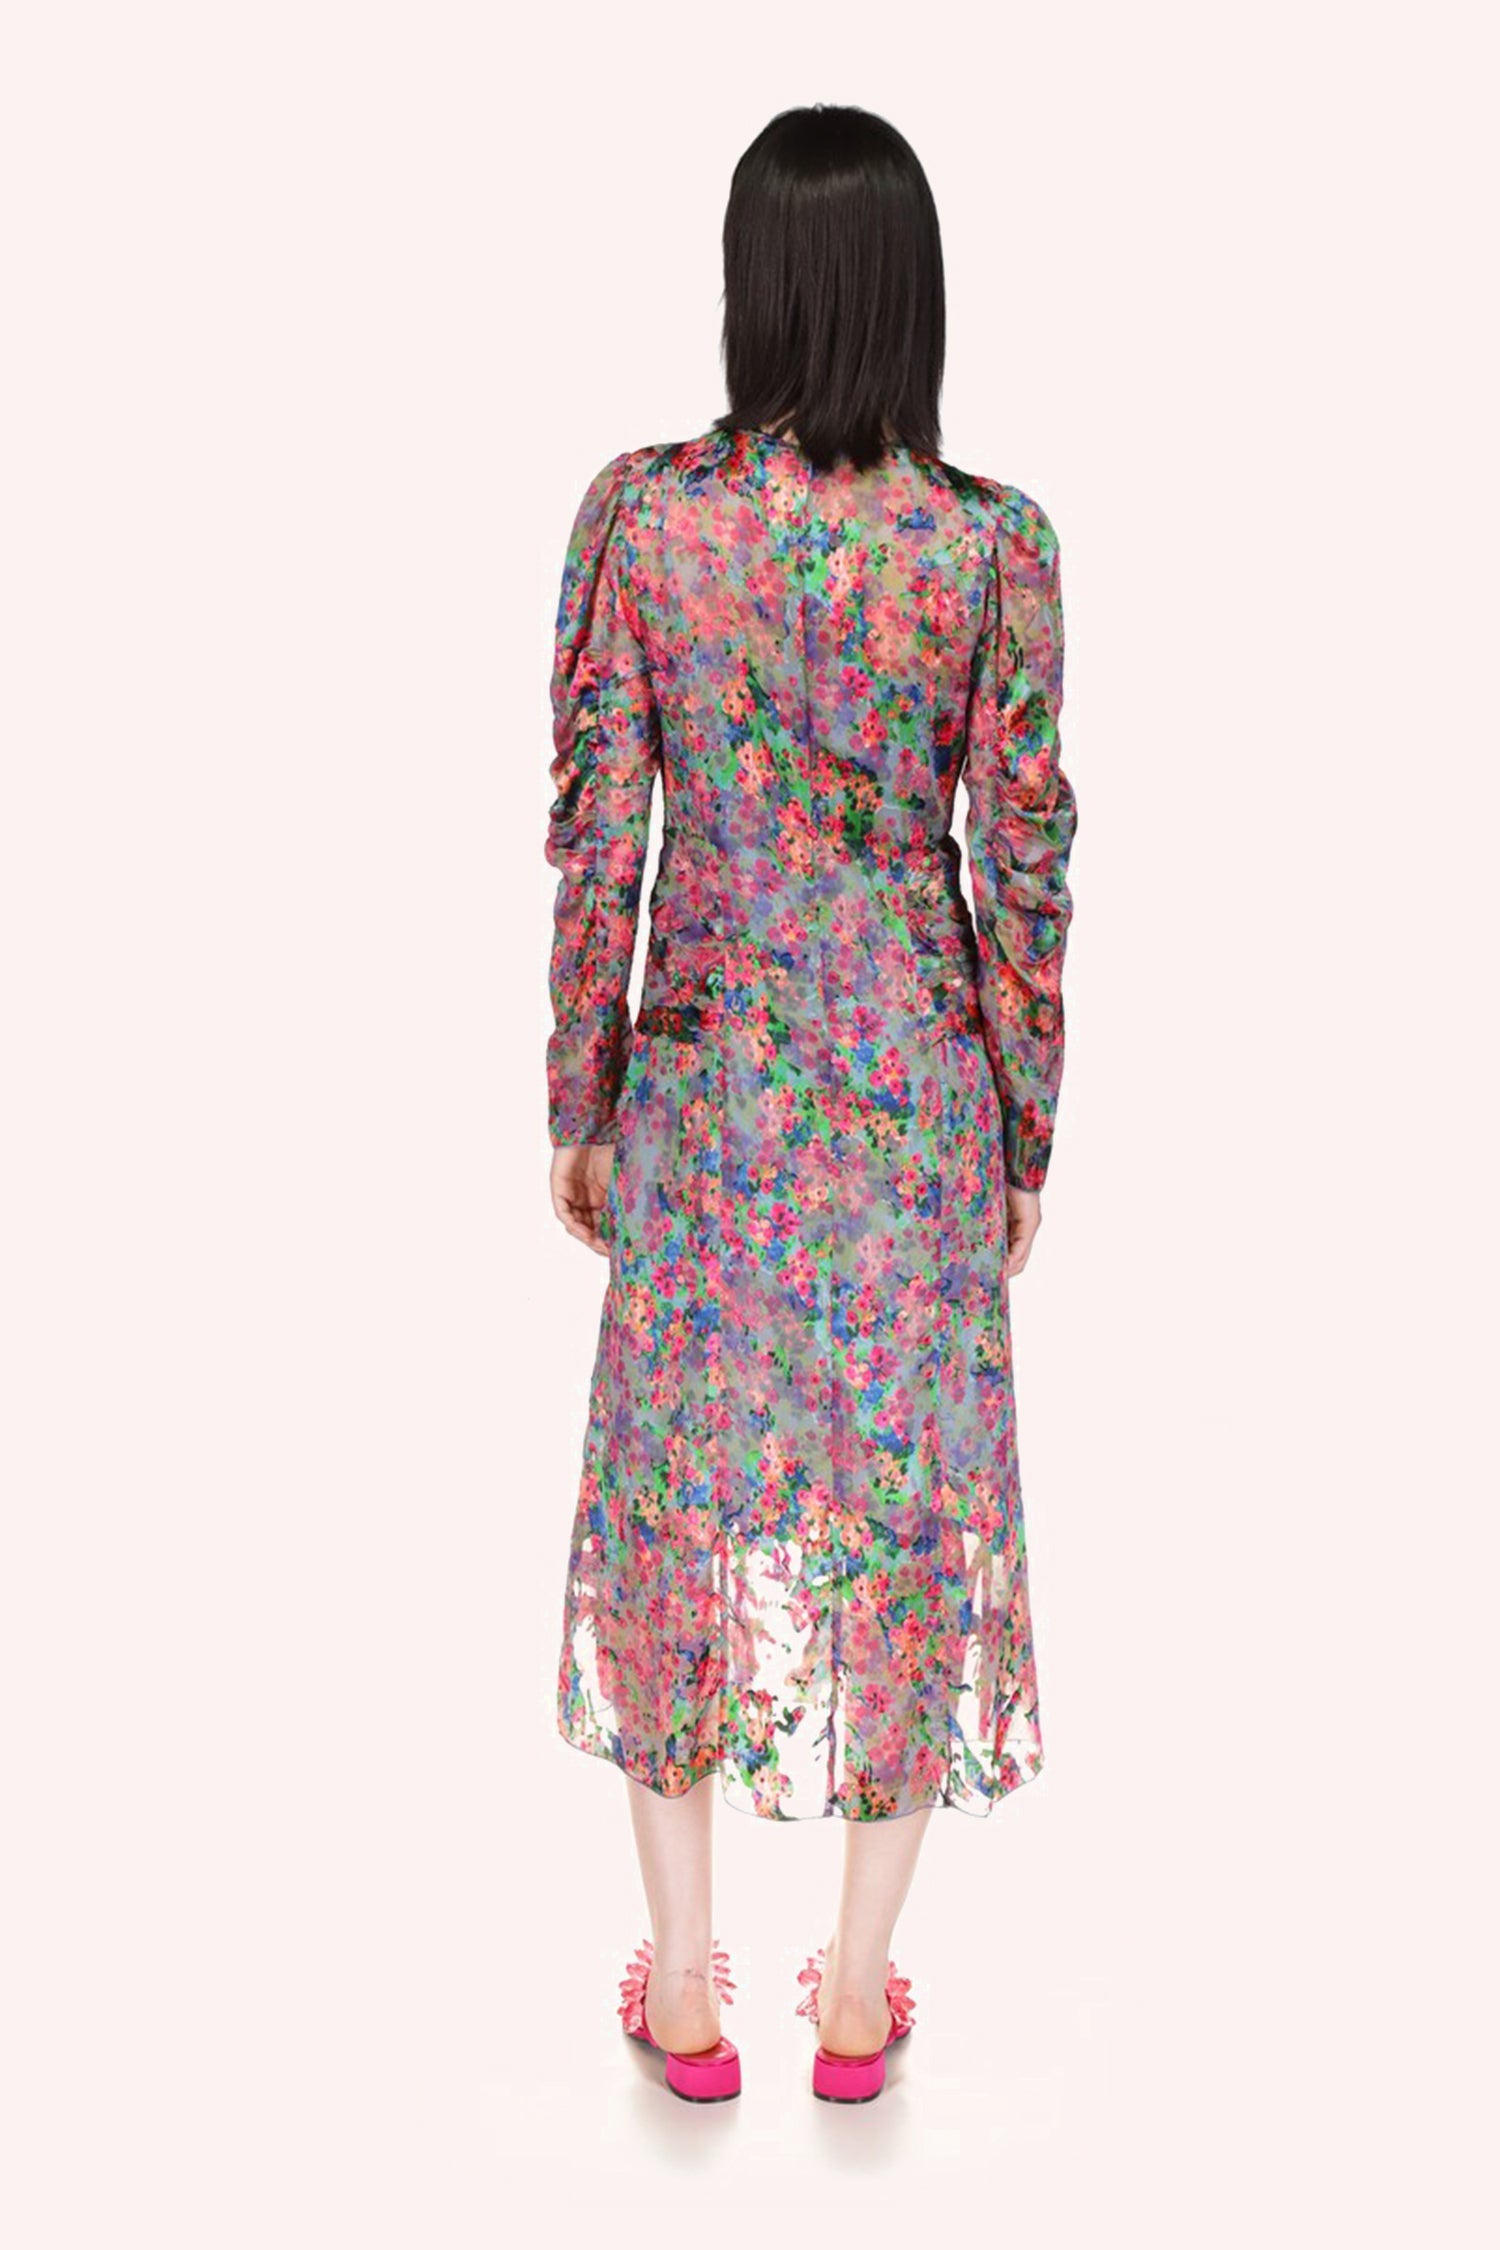 Giverny Burnout Satin Dress Dusty Blue, floral effect like an impressionist painting, transparent at bottom